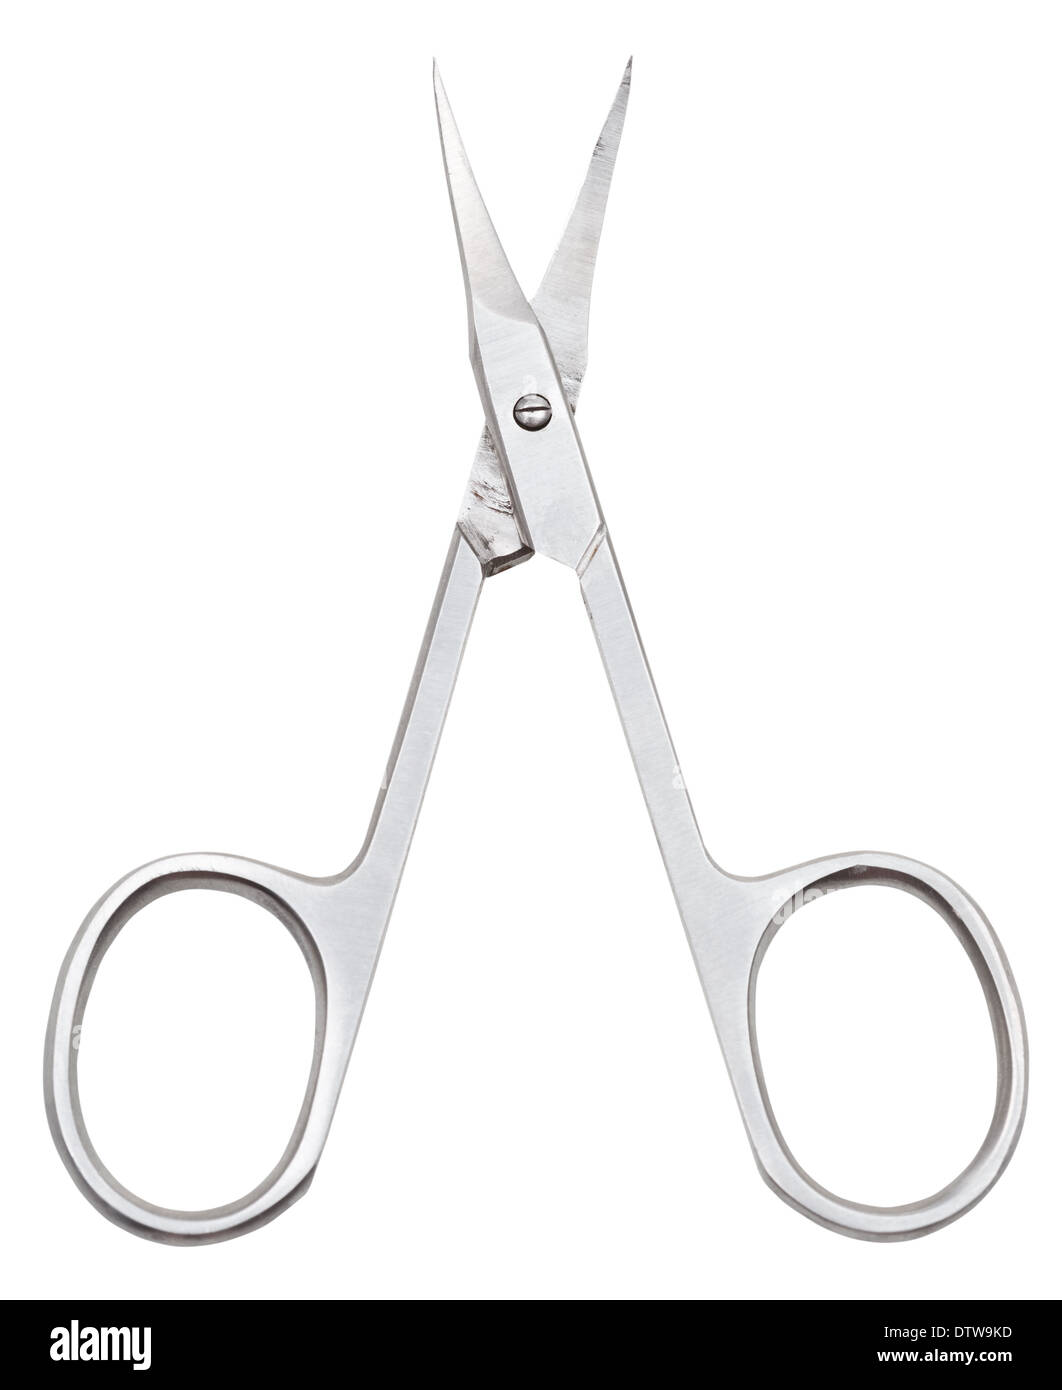 open manicure scissors isolated on white background Stock Photo